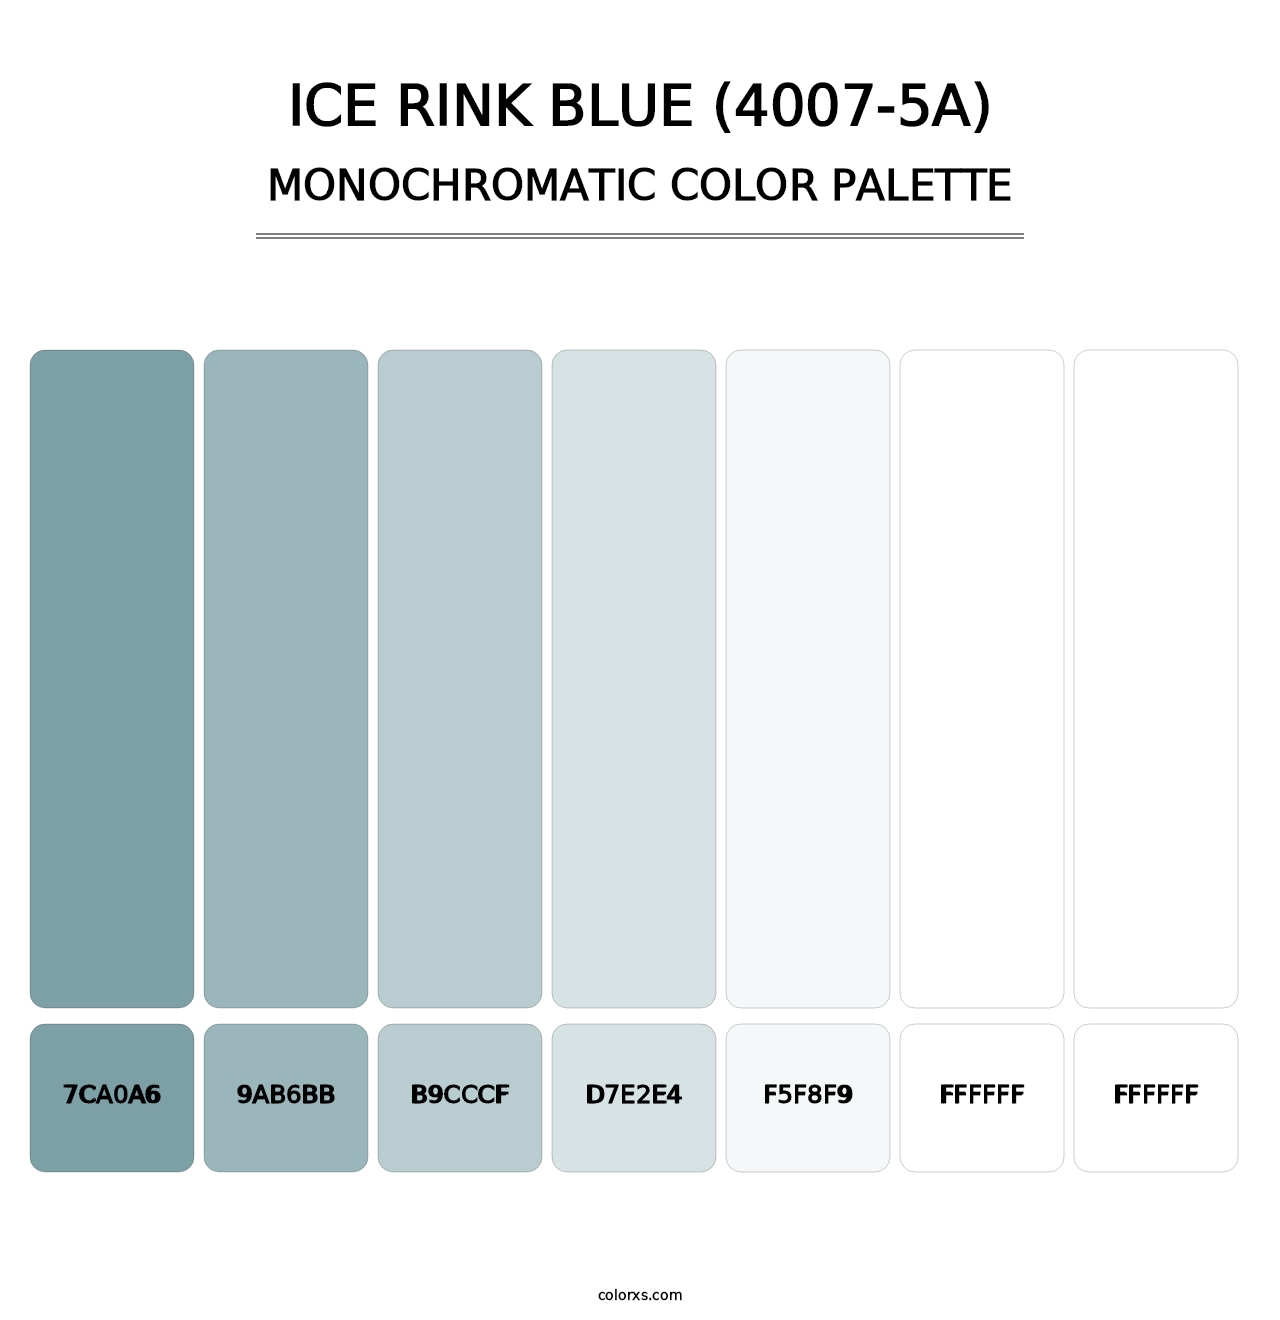 Ice Rink Blue (4007-5A) - Monochromatic Color Palette